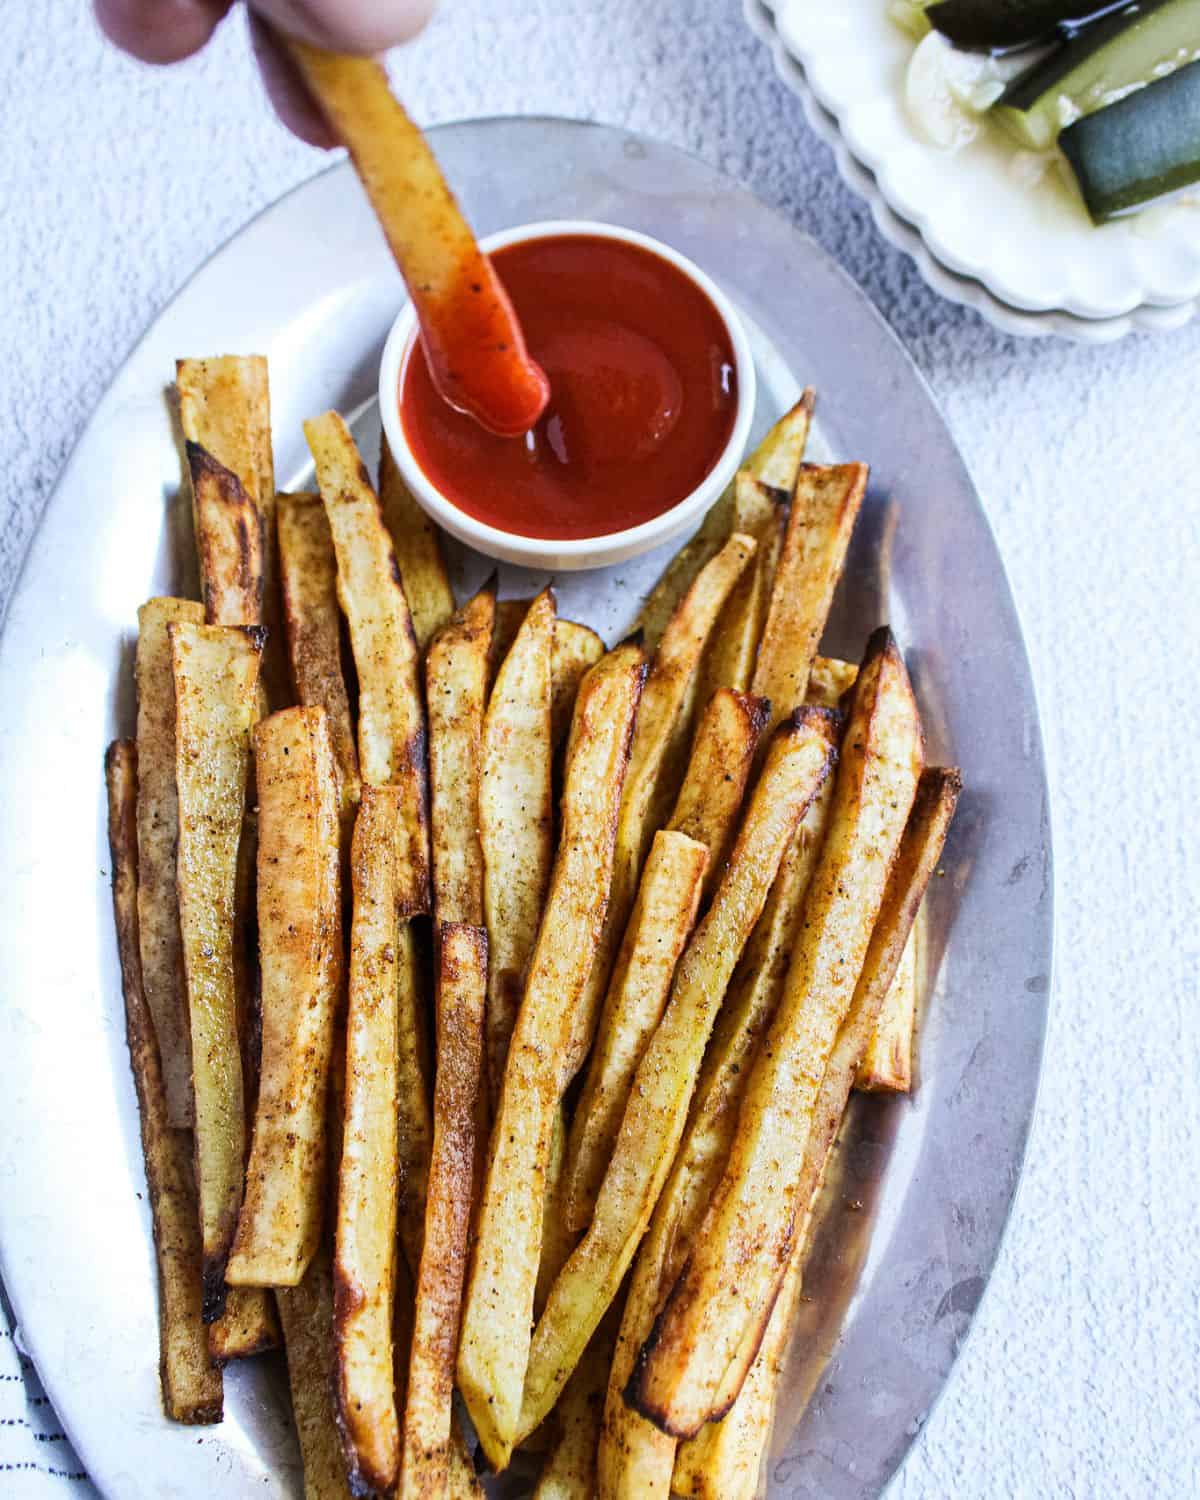 Finish dish of air-fryer sweet potato fries with dipping sauce.